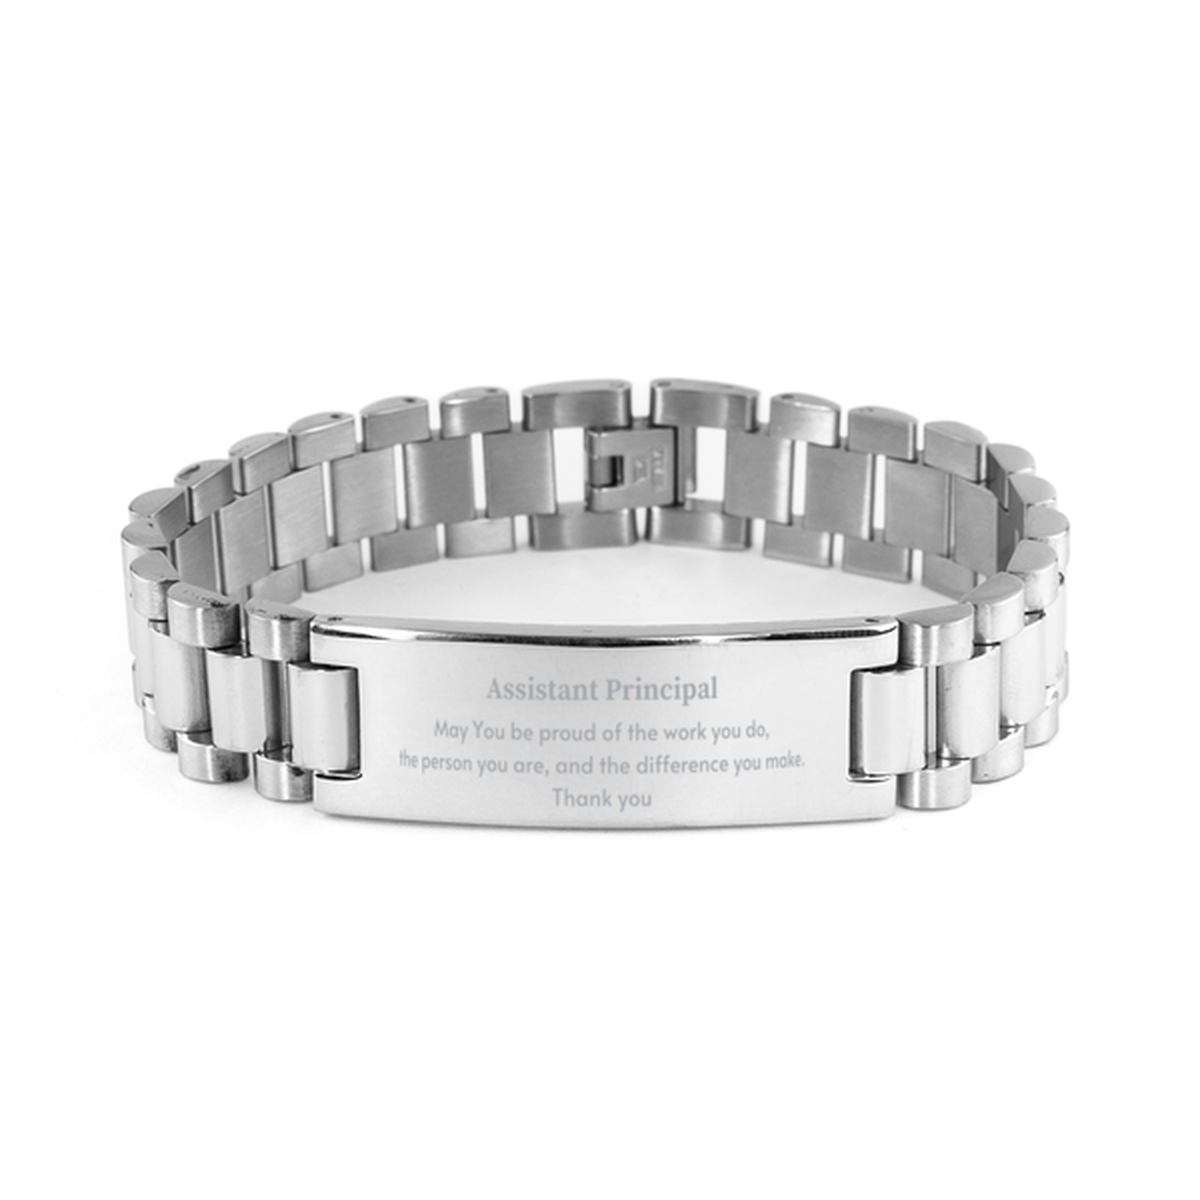 Heartwarming Ladder Stainless Steel Bracelet Retirement Coworkers Gifts for Assistant Principal, Assistant Principal May You be proud of the work you do, the person you are Gifts for Boss Men Women Friends